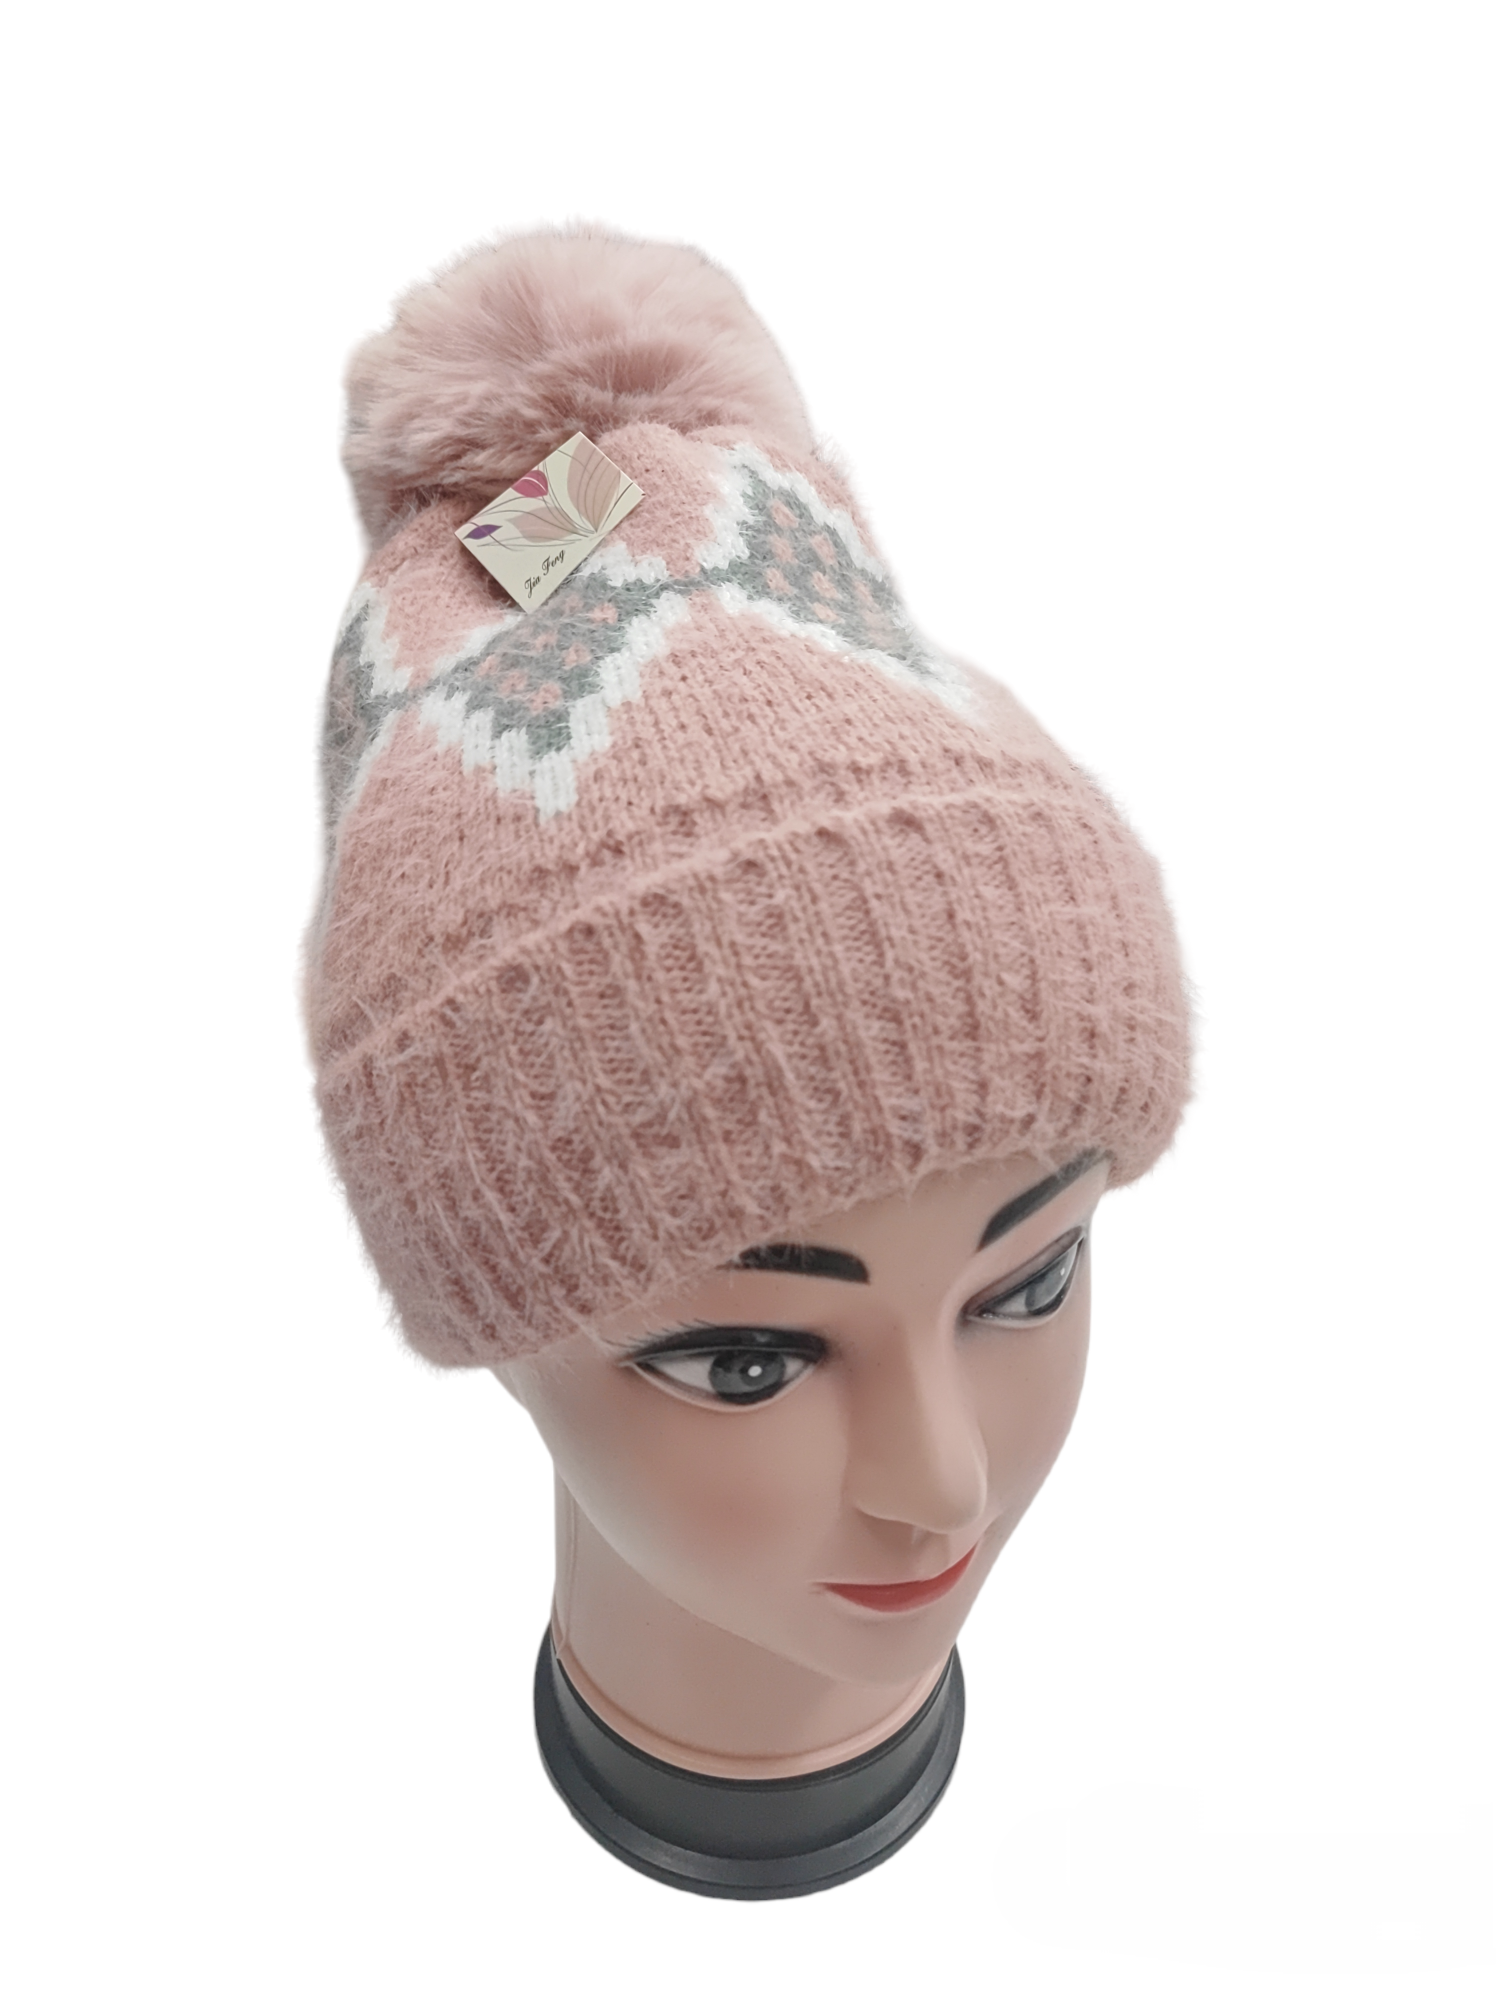 Women's hat with pompom filling (x12) #2